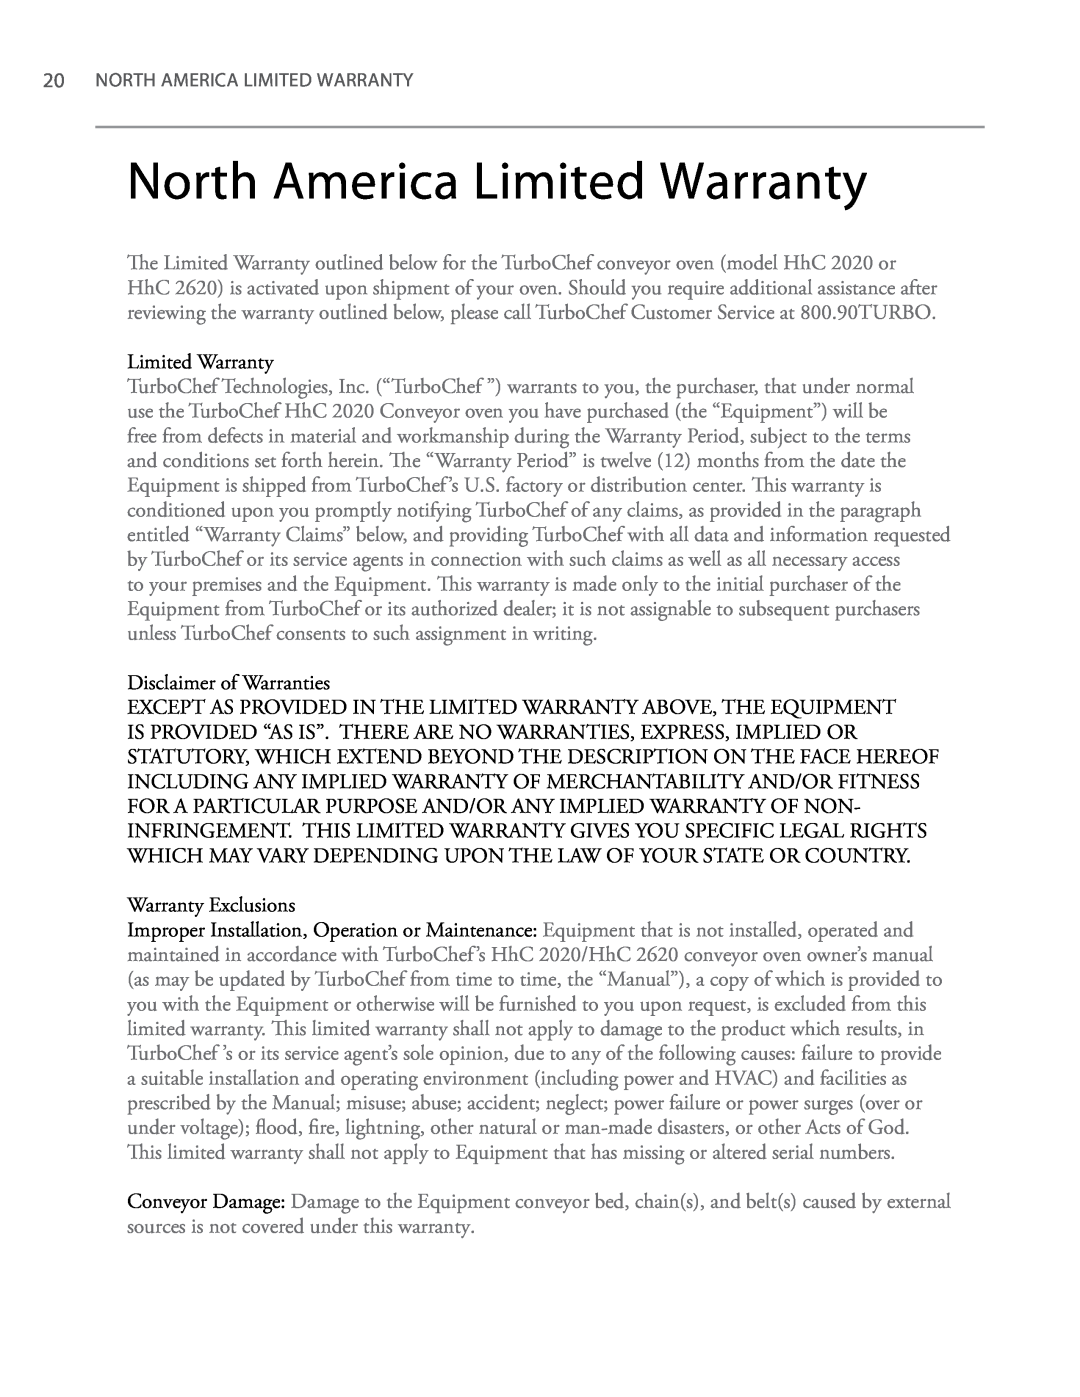 Turbo Chef Technologies 2620, 2020 owner manual North America Limited Warranty 